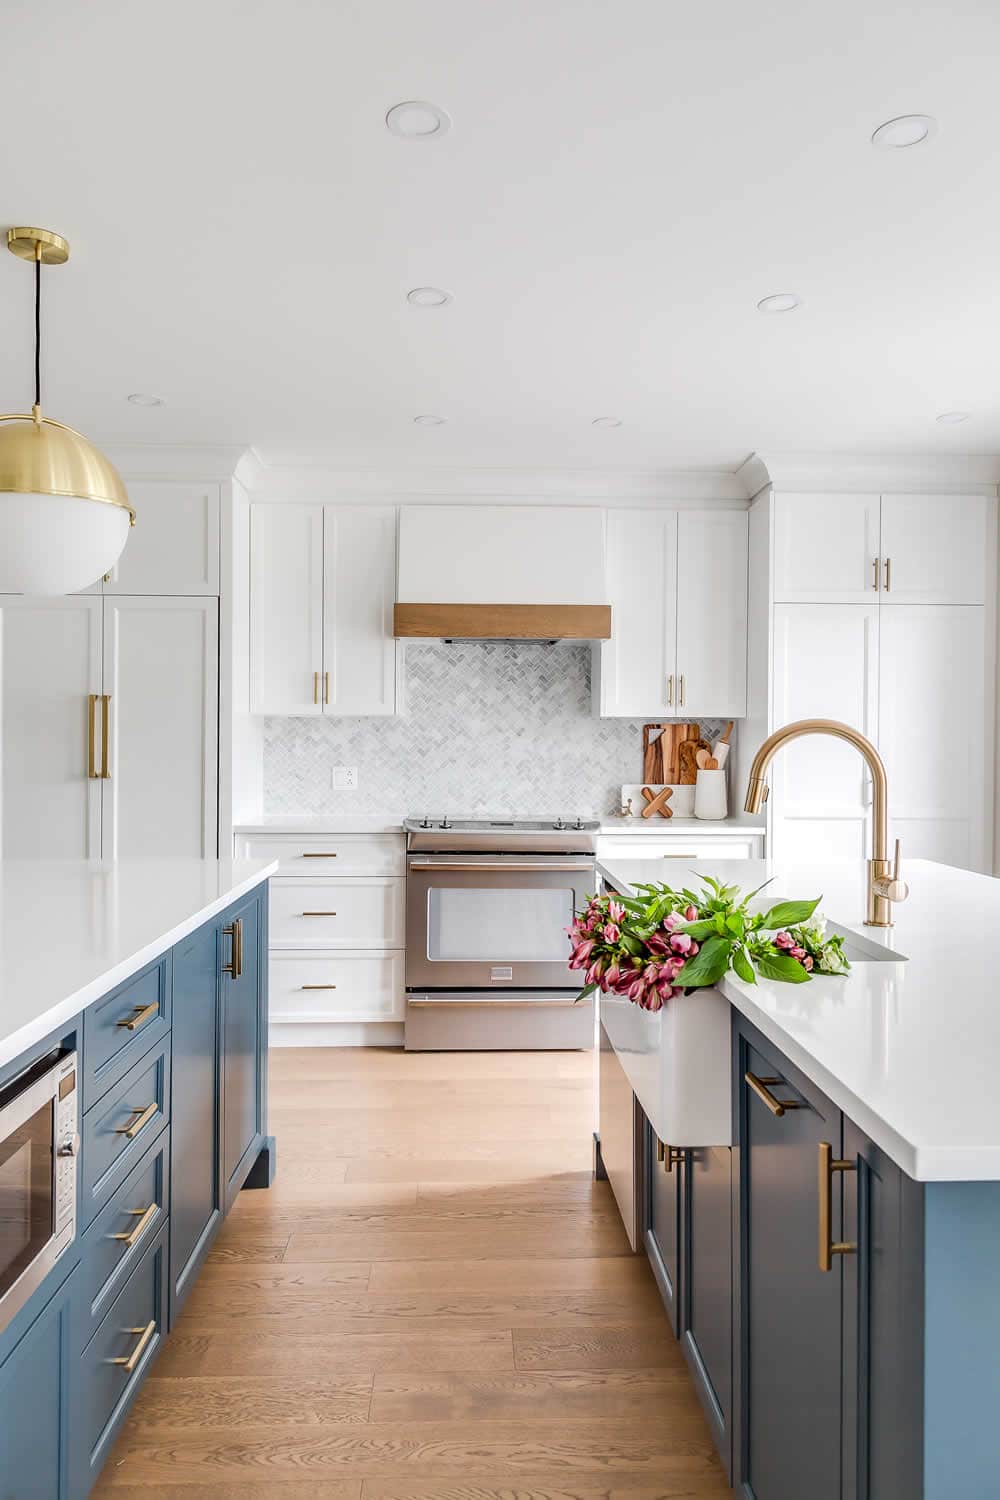 Grey blue kitchen cabinets with white quartz countertops. Pink tulips in sink. Marble herringbone tile for backsplash